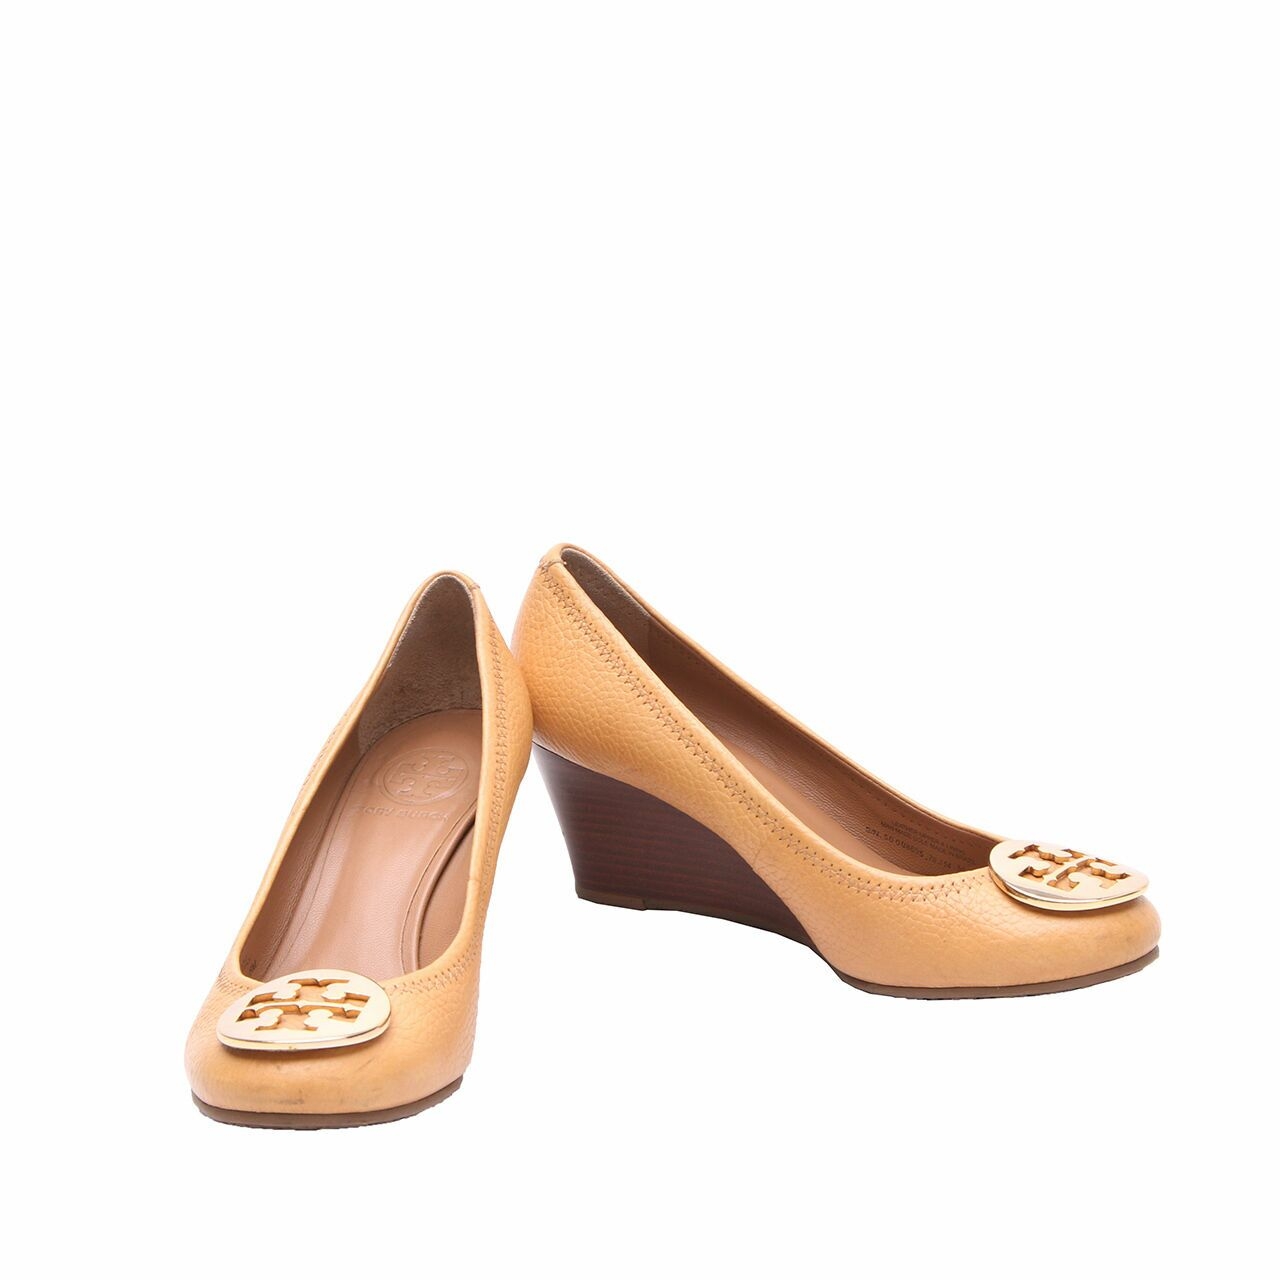 Tory Burch Sally Royal Tan/Gold Tumbled Leather Wedges